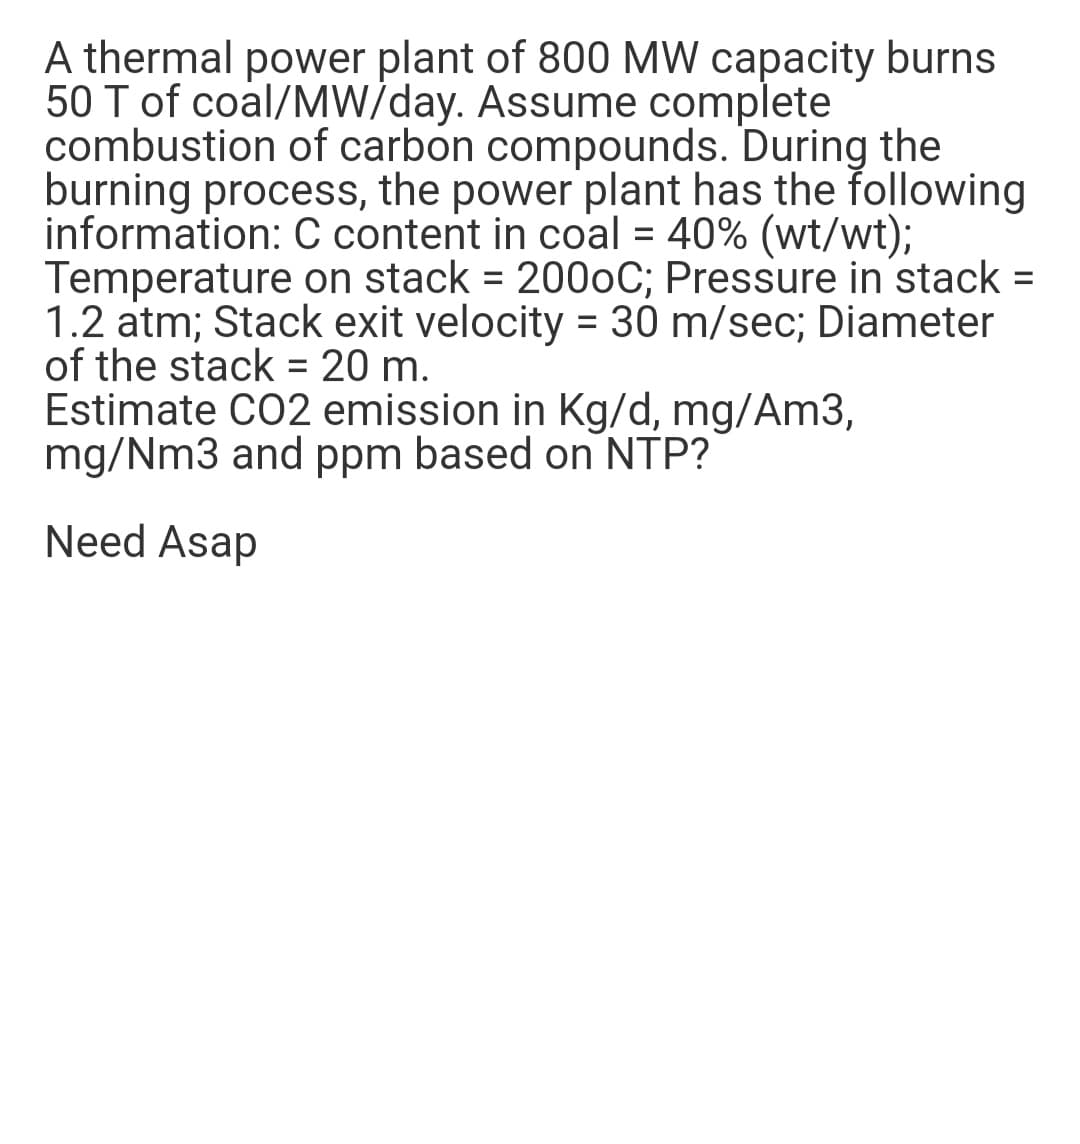 A thermal power plant of 800 MW capacity burns
50 T of coal/MW/day. Assume complete
combustion of carbon compounds. During the
burning process, the power plant has the following
information: C content in coal = 40% (wt/wt);
Temperature on stack = 2000C; Pressure in stack =
1.2 atm; Stack exit velocity = 30 m/sec; Diameter
of the stack = 20 m.
Estimate CO2 emission in Kg/d, mg/Am3,
mg/Nm3 and ppm based on NTP?
%3D
Need Asap
